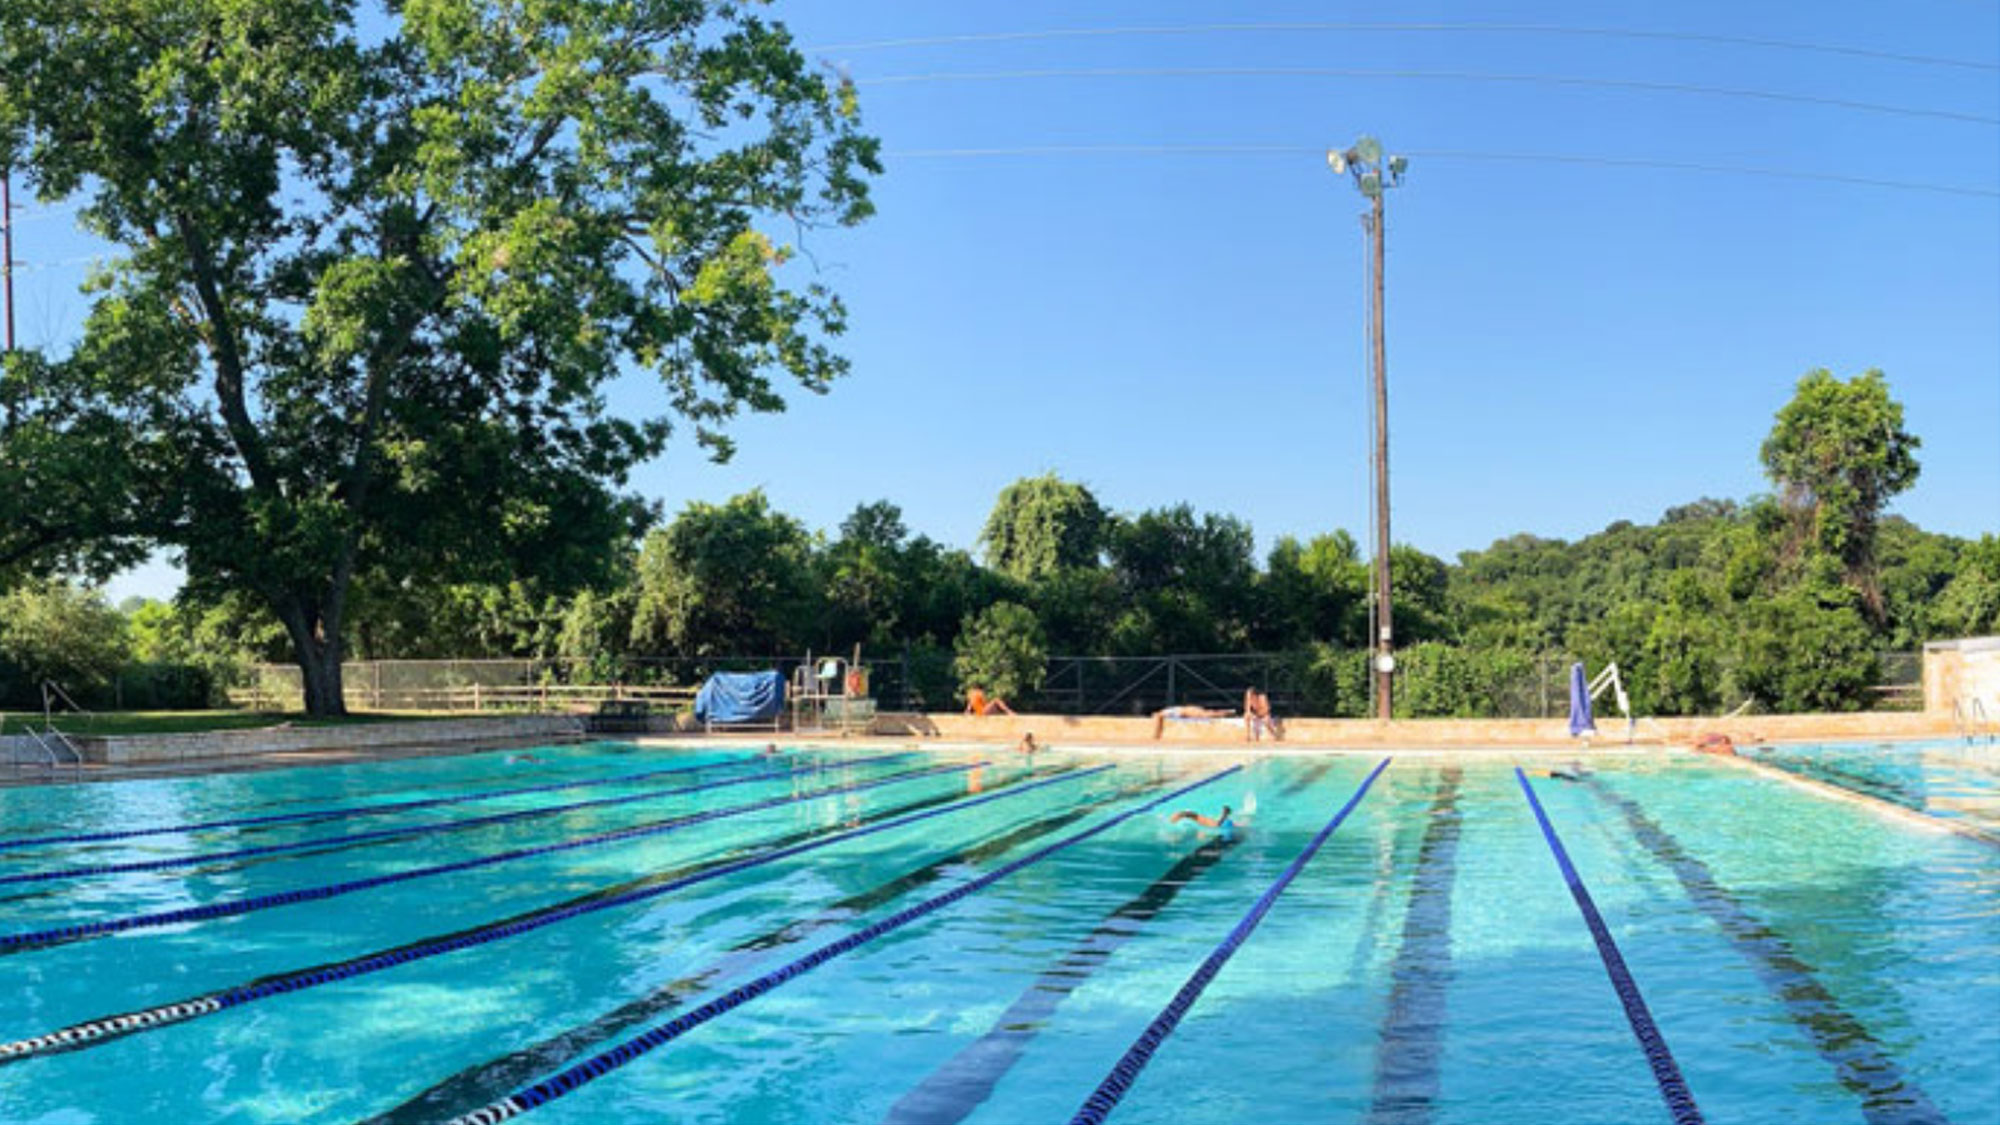 An outdoor swimming pool and rec center with swimming lanes